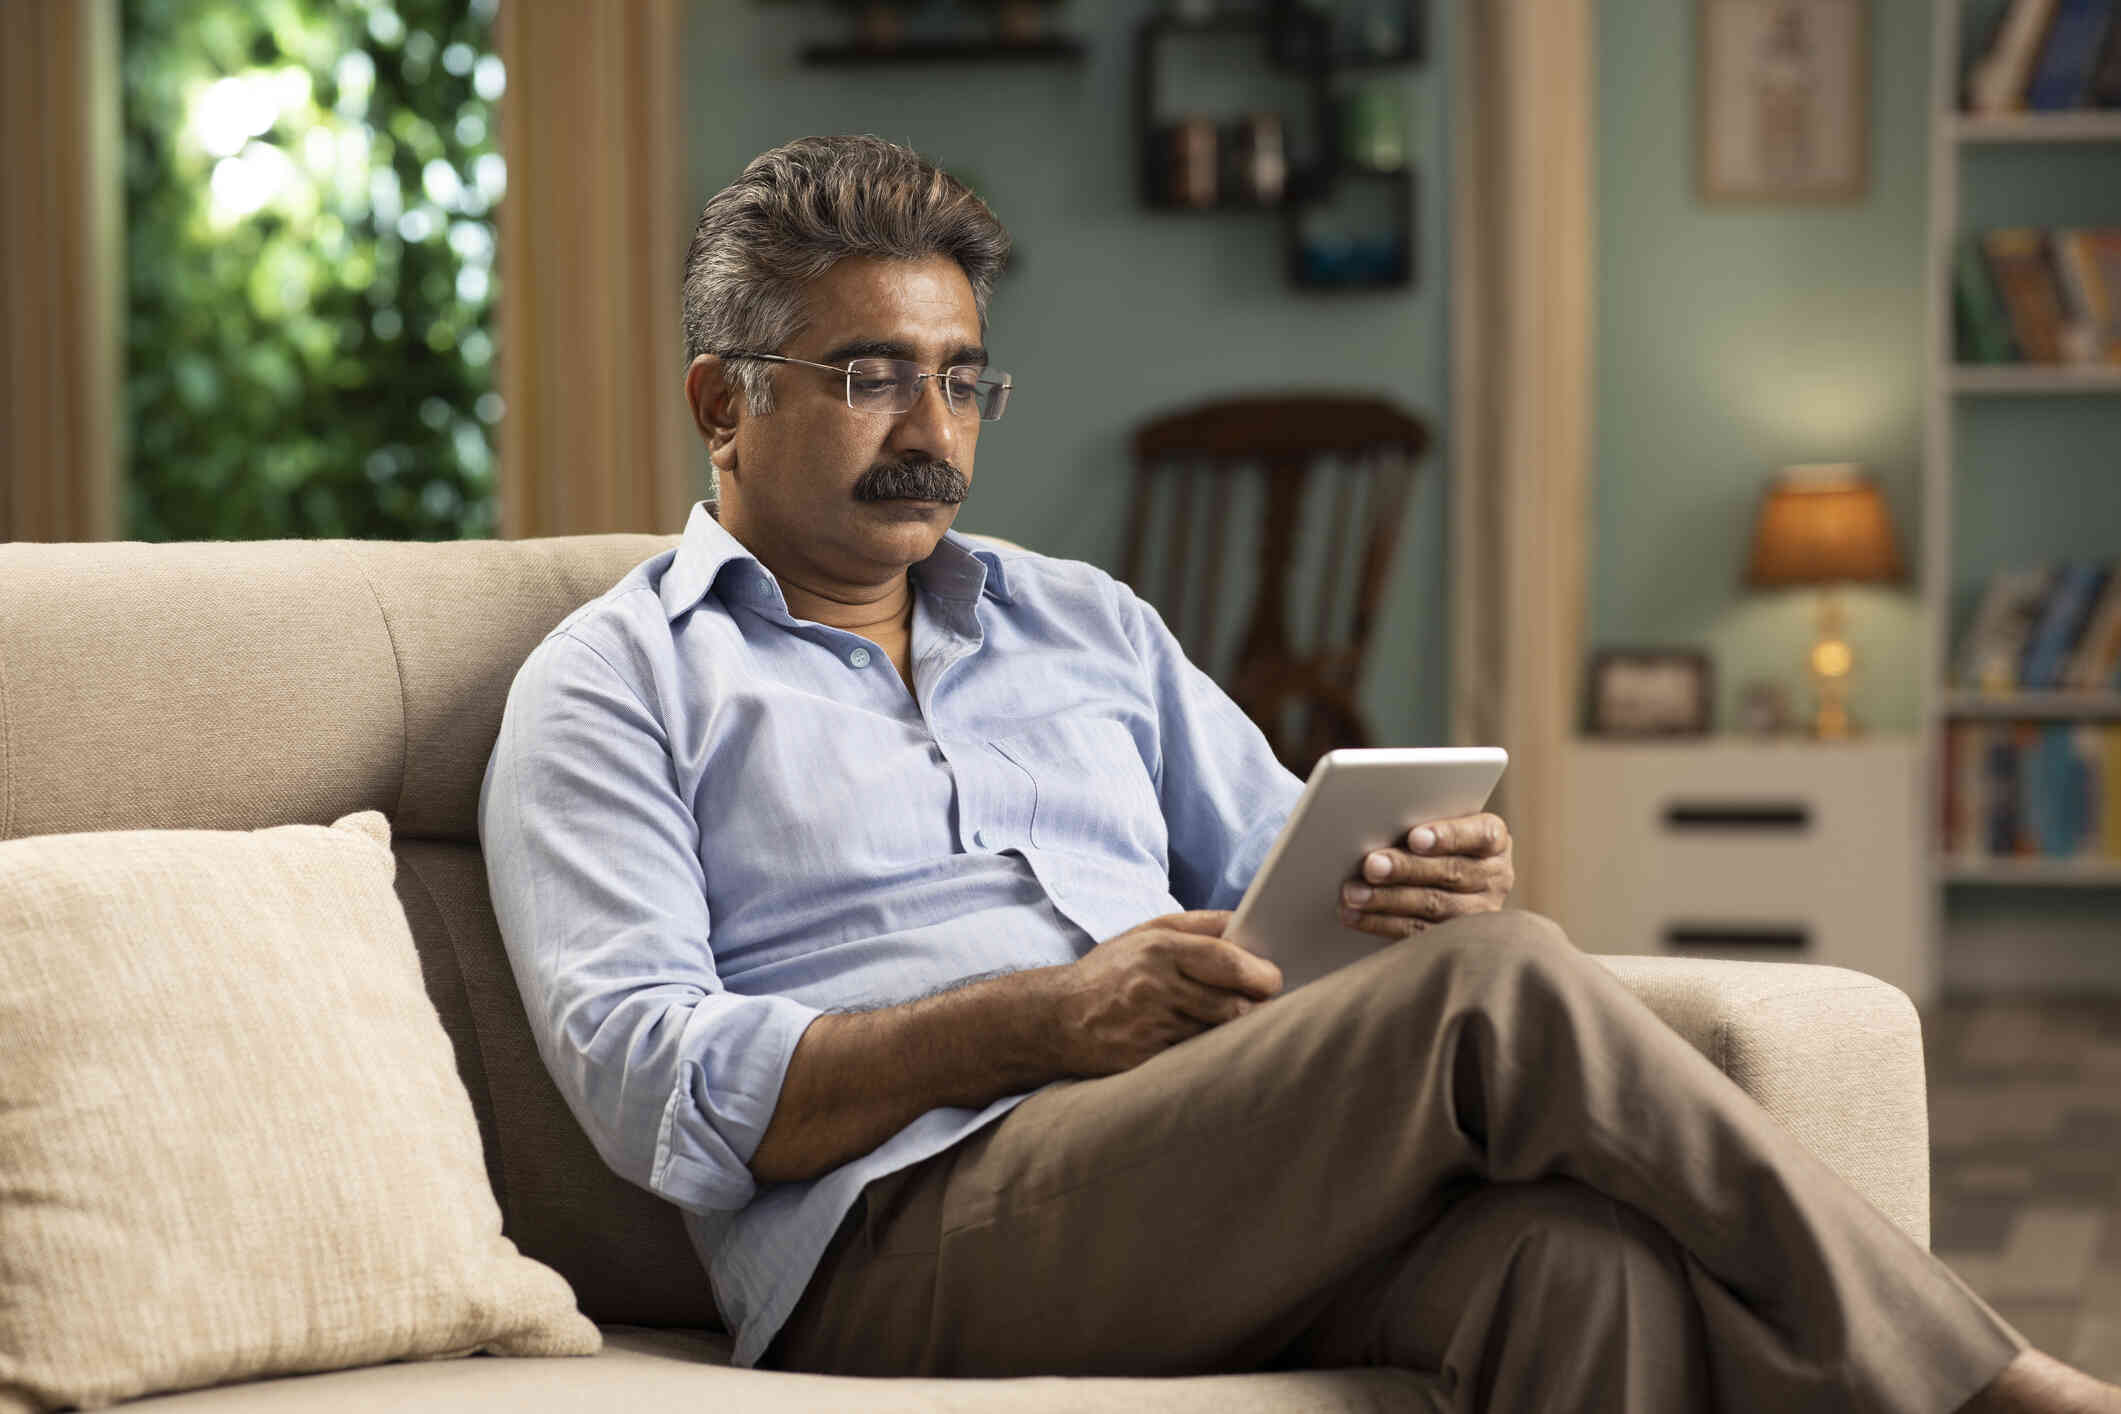 A man in a blue button down shirt sits on the couch and looks at the tablet in his hands.